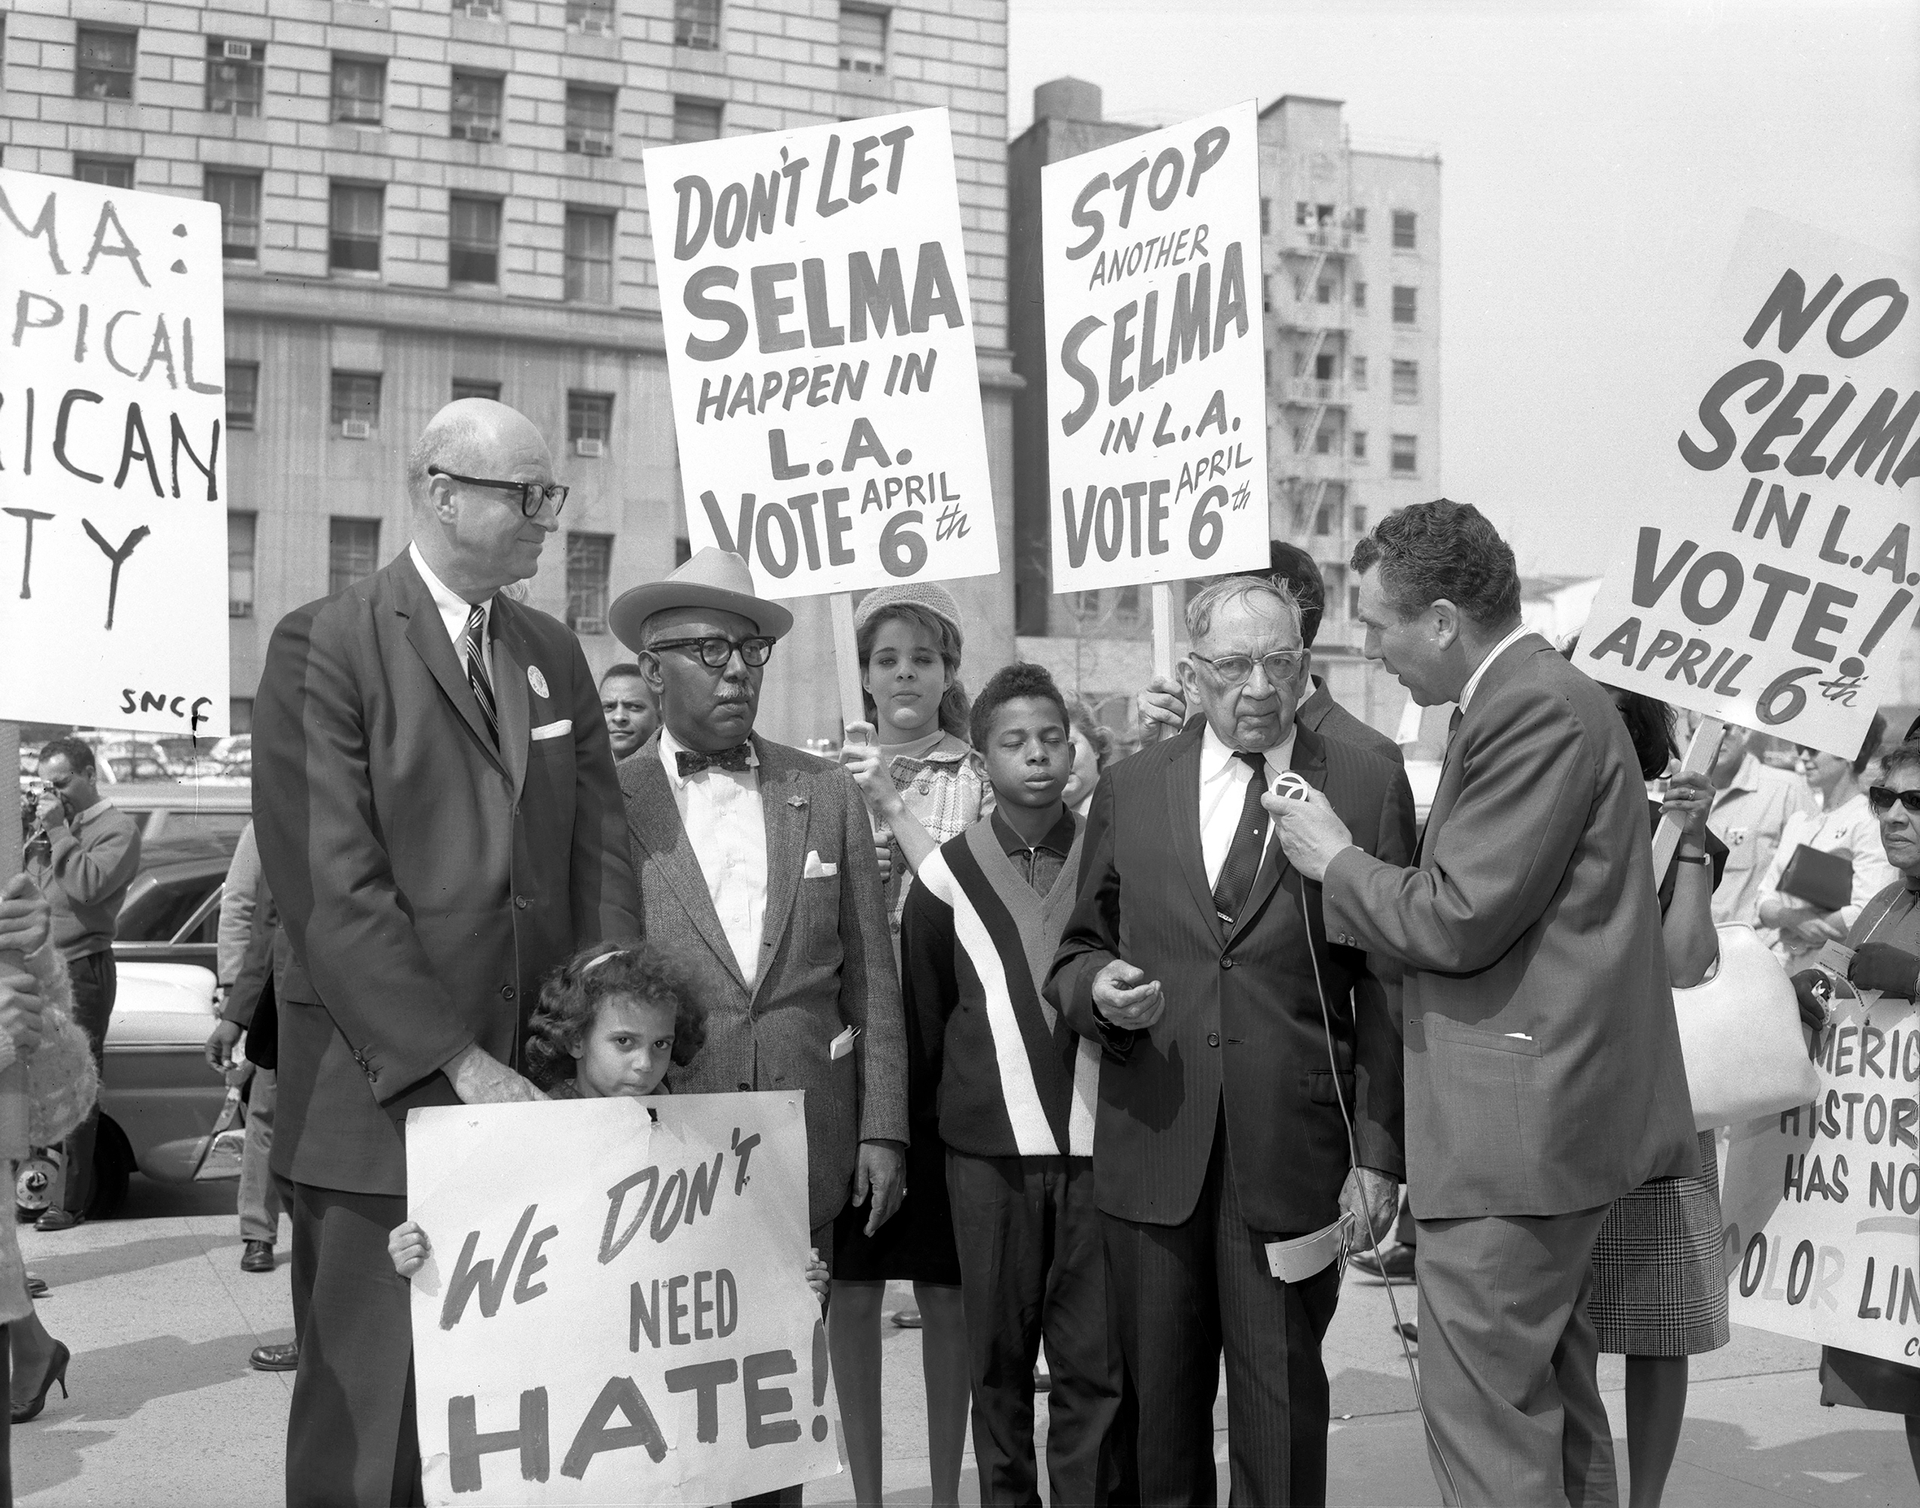 Proposition 14 was a 1964 State of California ballot initiative that would nullify the 1963 Rumford Fair Housing Act and allow property owners to openly discriminate when selling or leasing a home. It became law with 65% of voters supporting it.